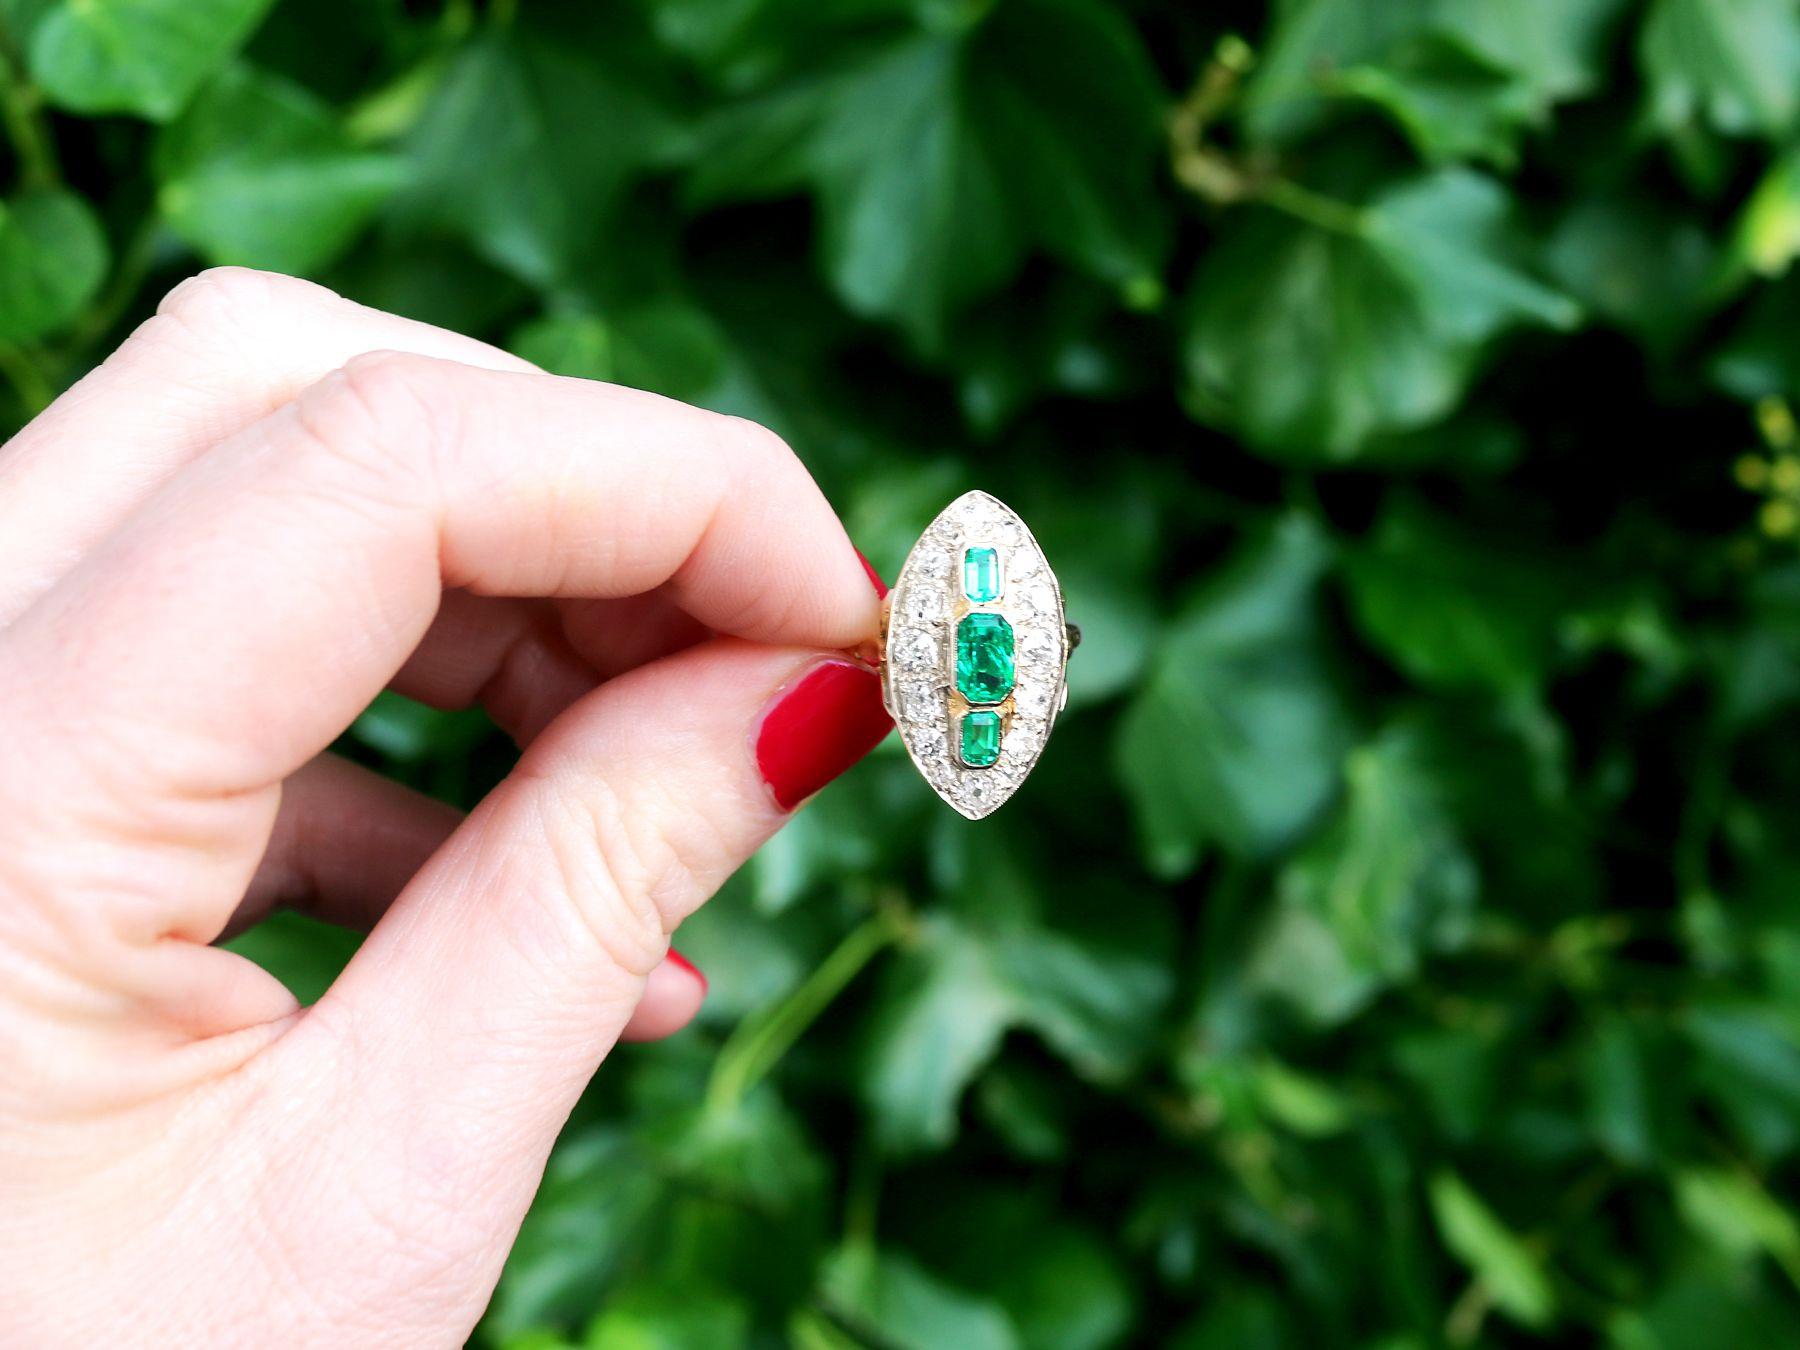 A stunning antique 1.76 carat emerald and 2.05 carat emerald, 18k yellow gold marquise 
shaped dress ring; part of our diverse antique jewelry and estate jewelry collections.

This stunning, fine and impressive antique emerald cut emerald ring has